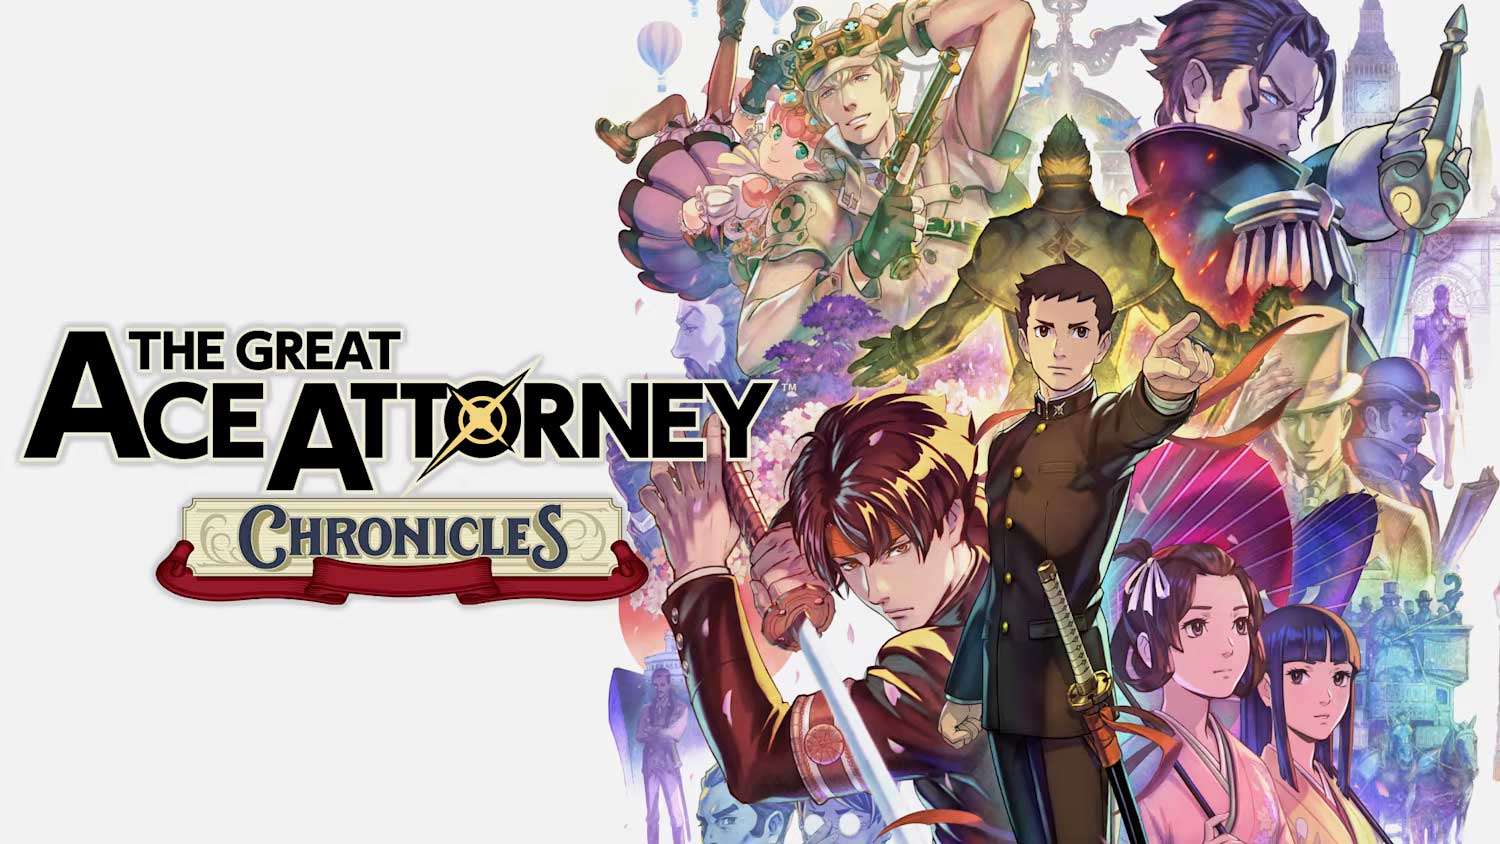 Deals: Shin Megami Tensei V, Great Ace Attorney Chronicles, Kirby and the Forgotten Land